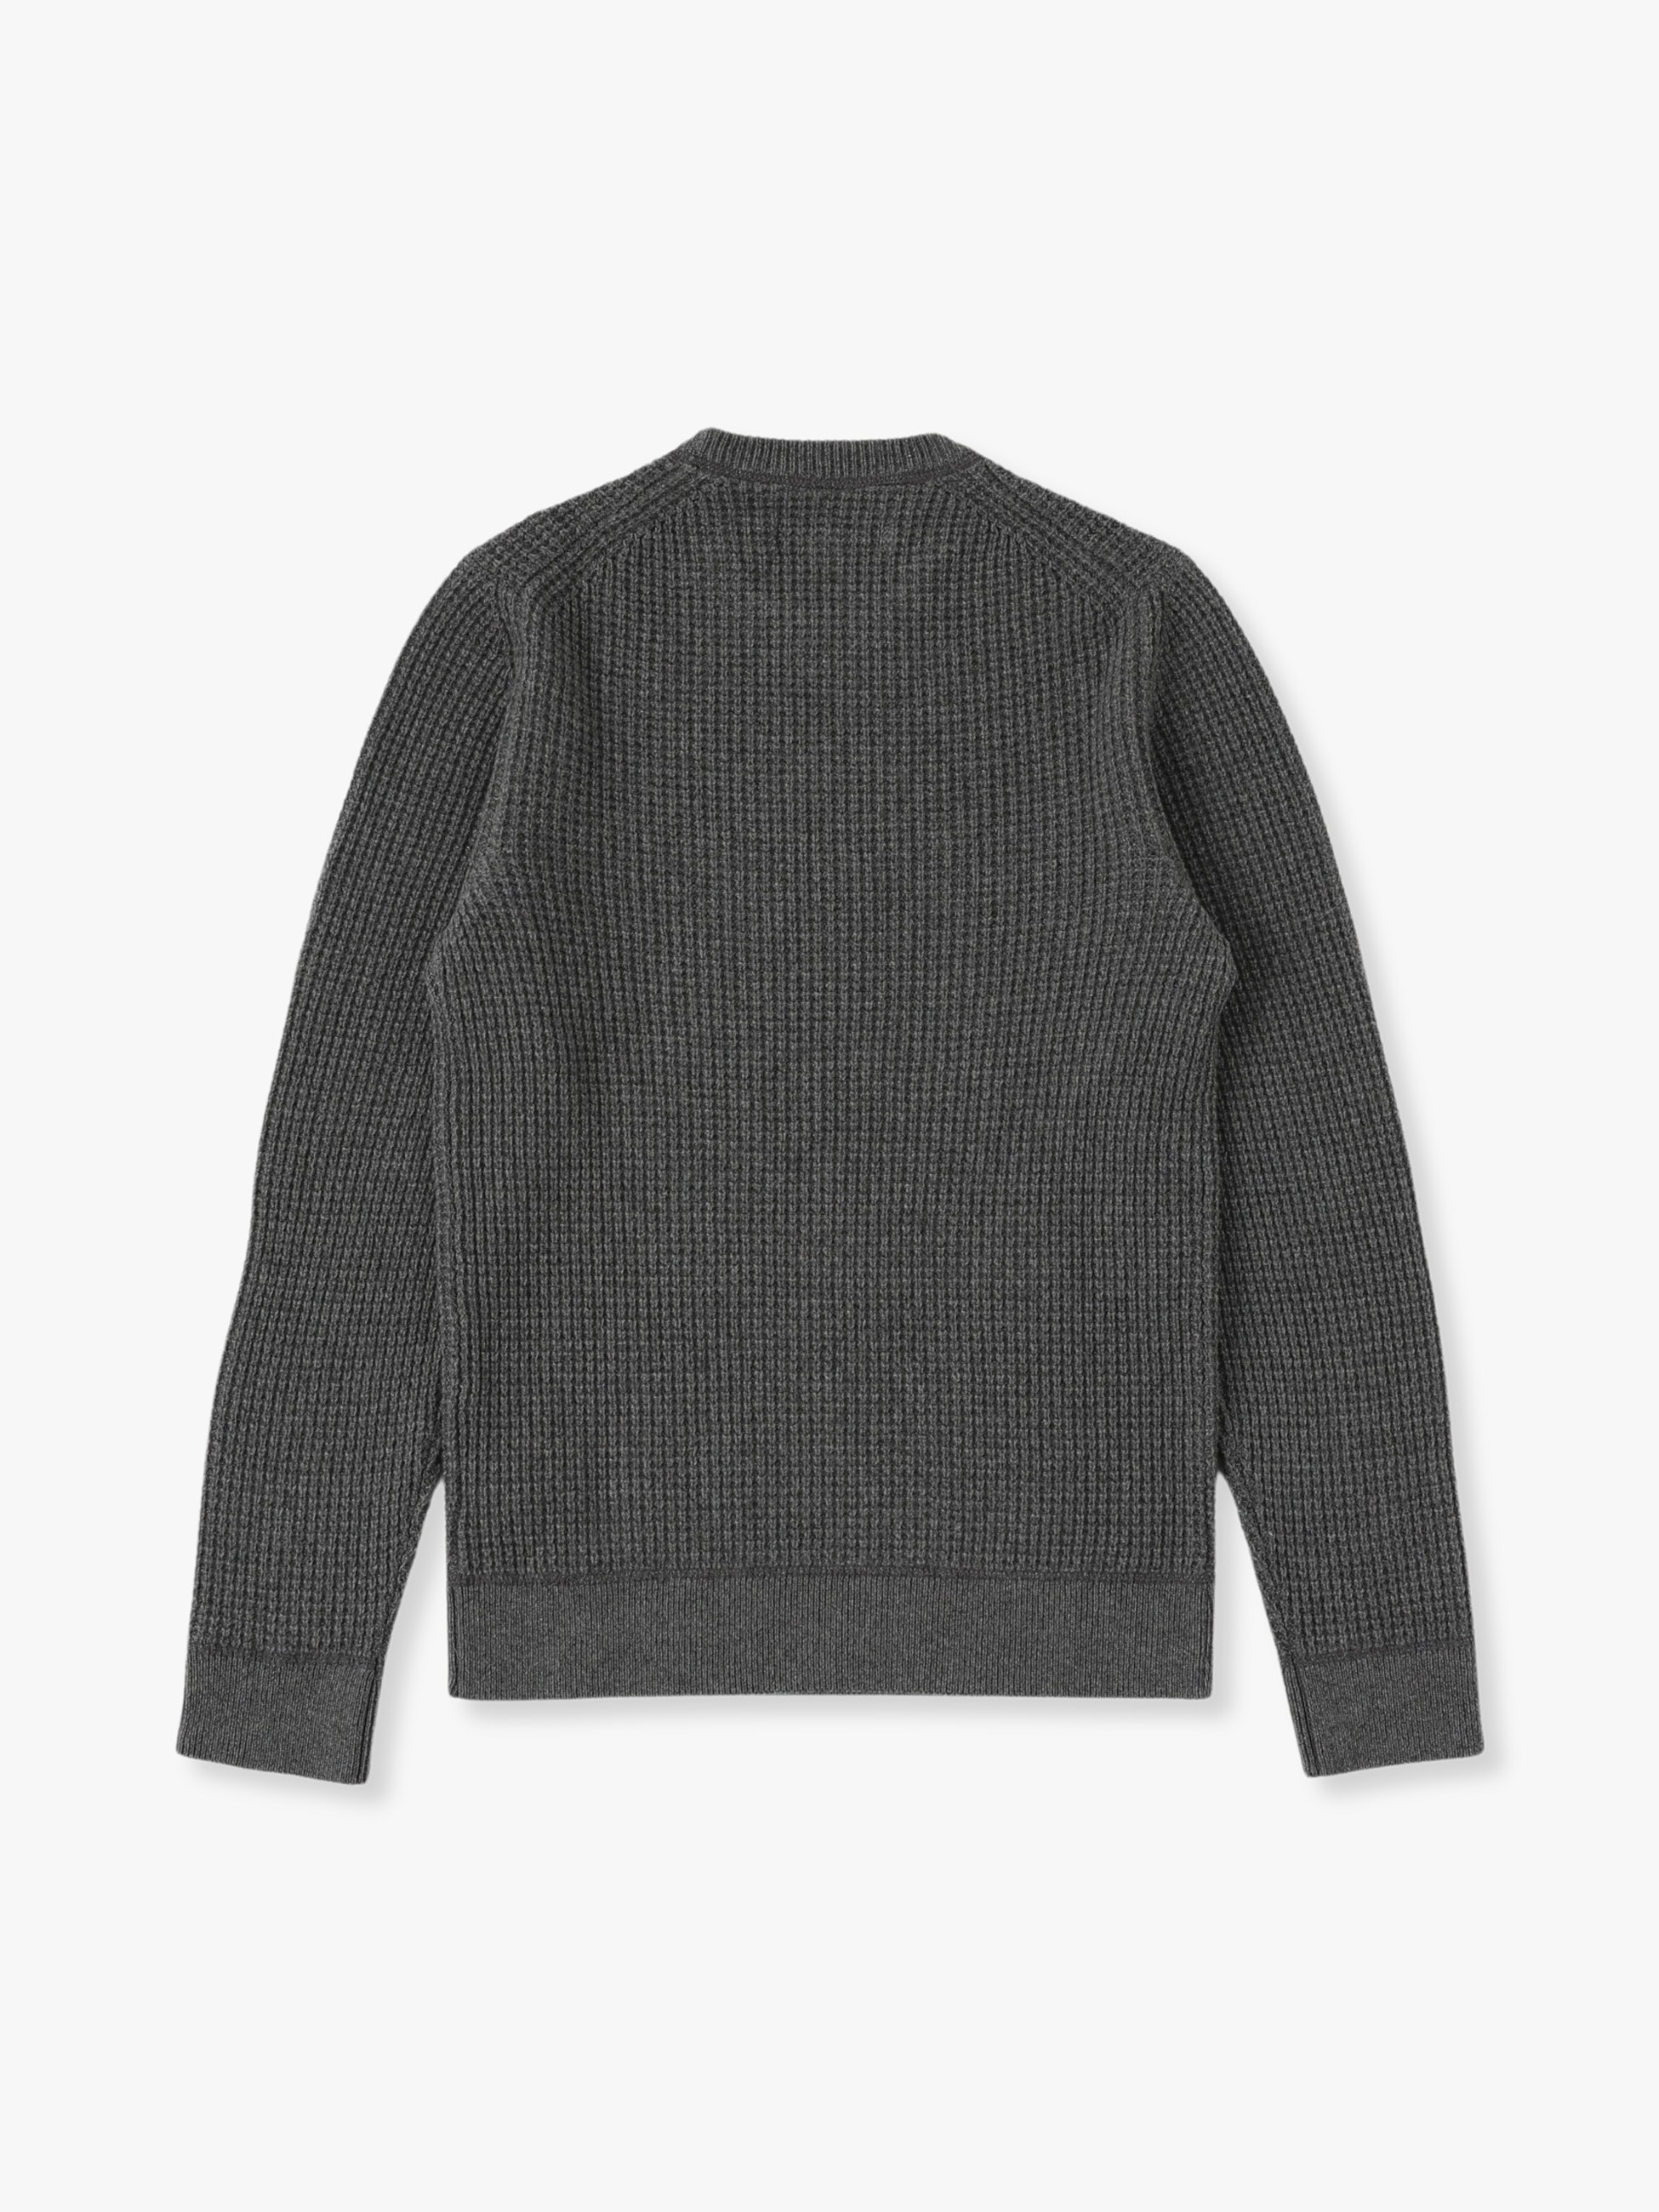 Reimagine Cashmere Waffle Sweater｜OUTERKNOWN(アウターノウン)｜Ron ...